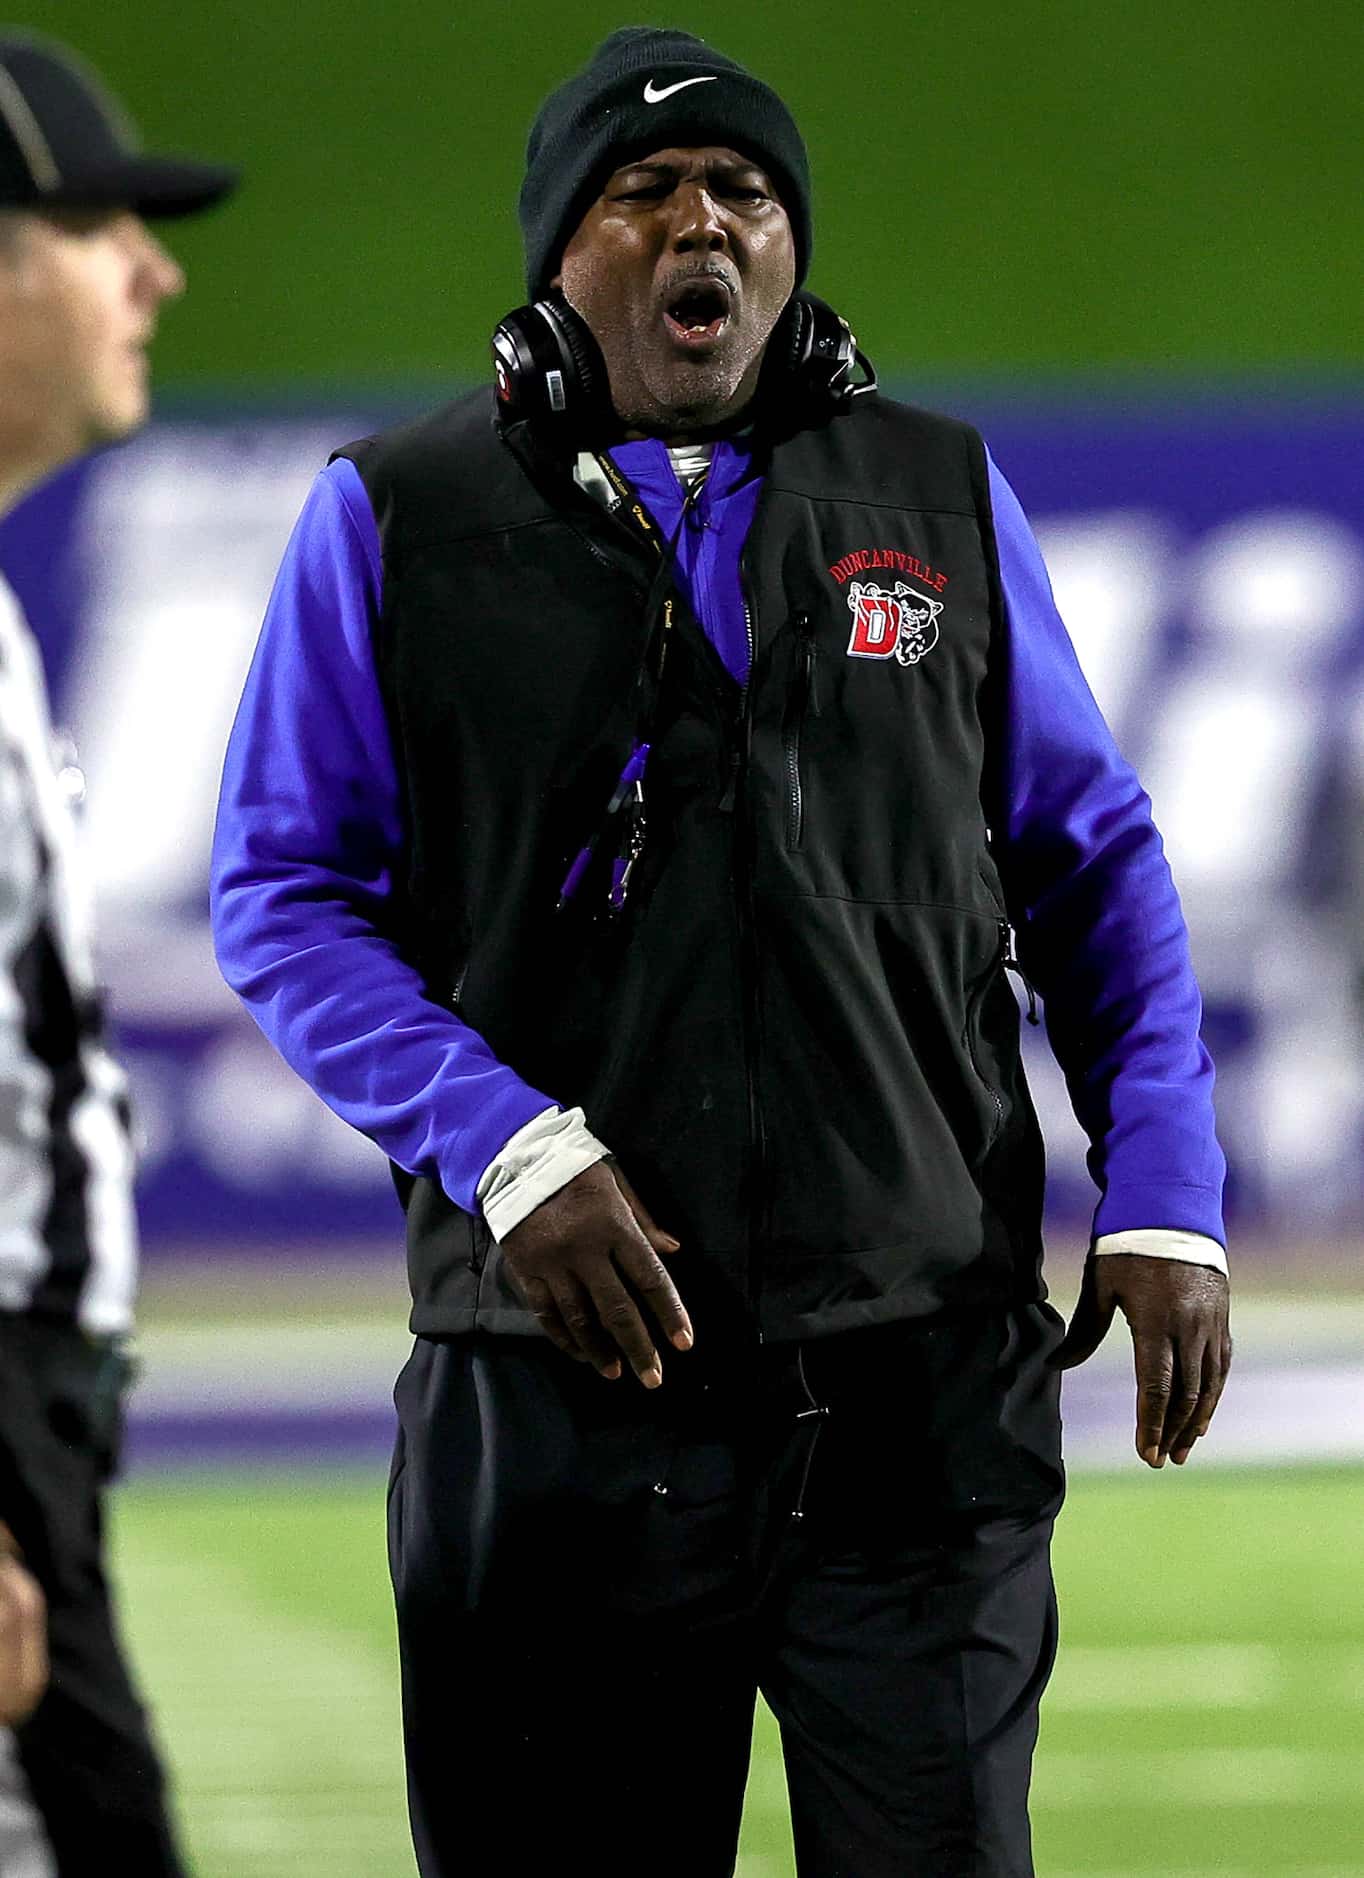 Duncanville head coach Reginald Samples disagrees on a call in the game against Rockwall...